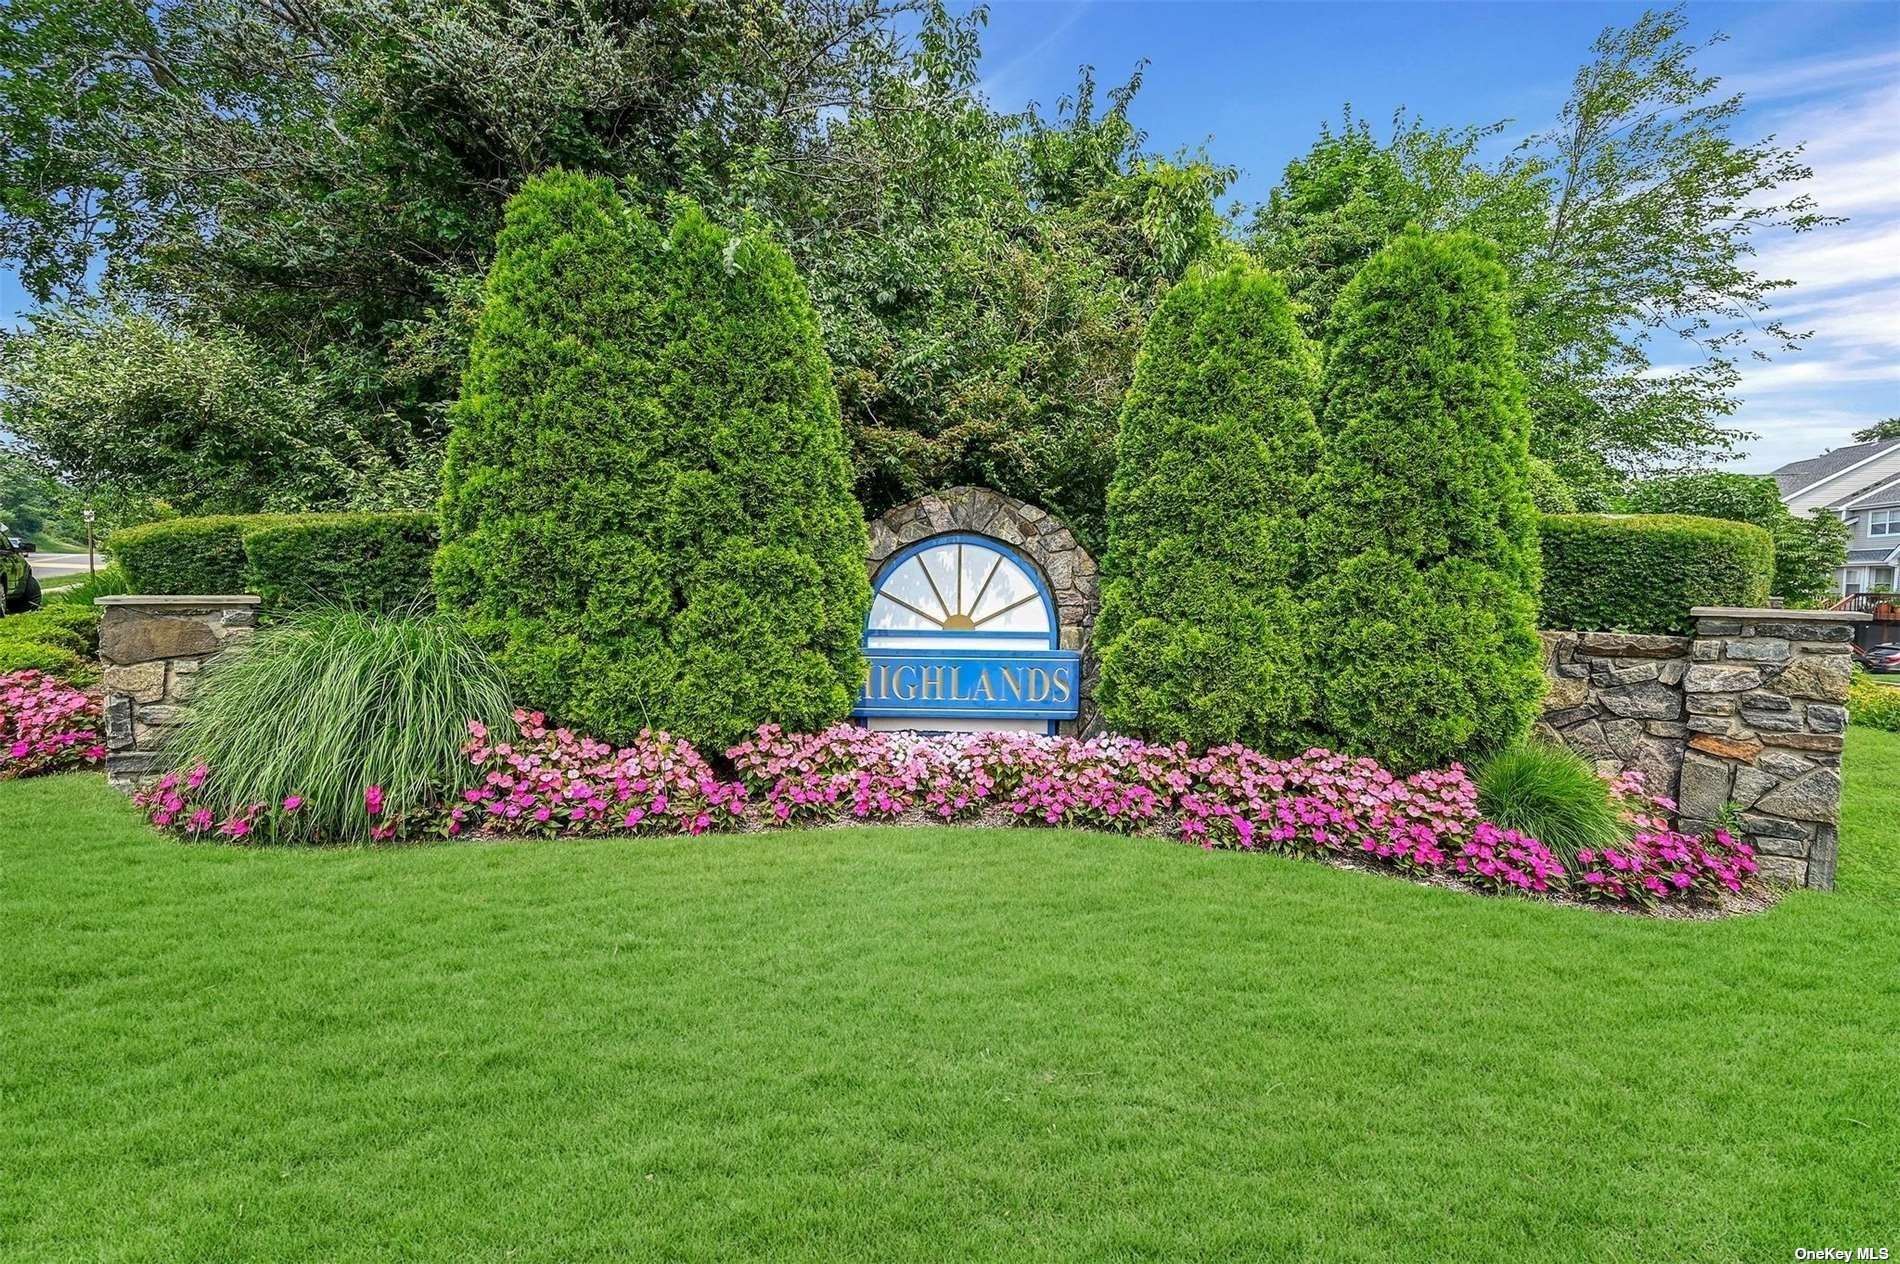 a view of a garden with flowers and trees